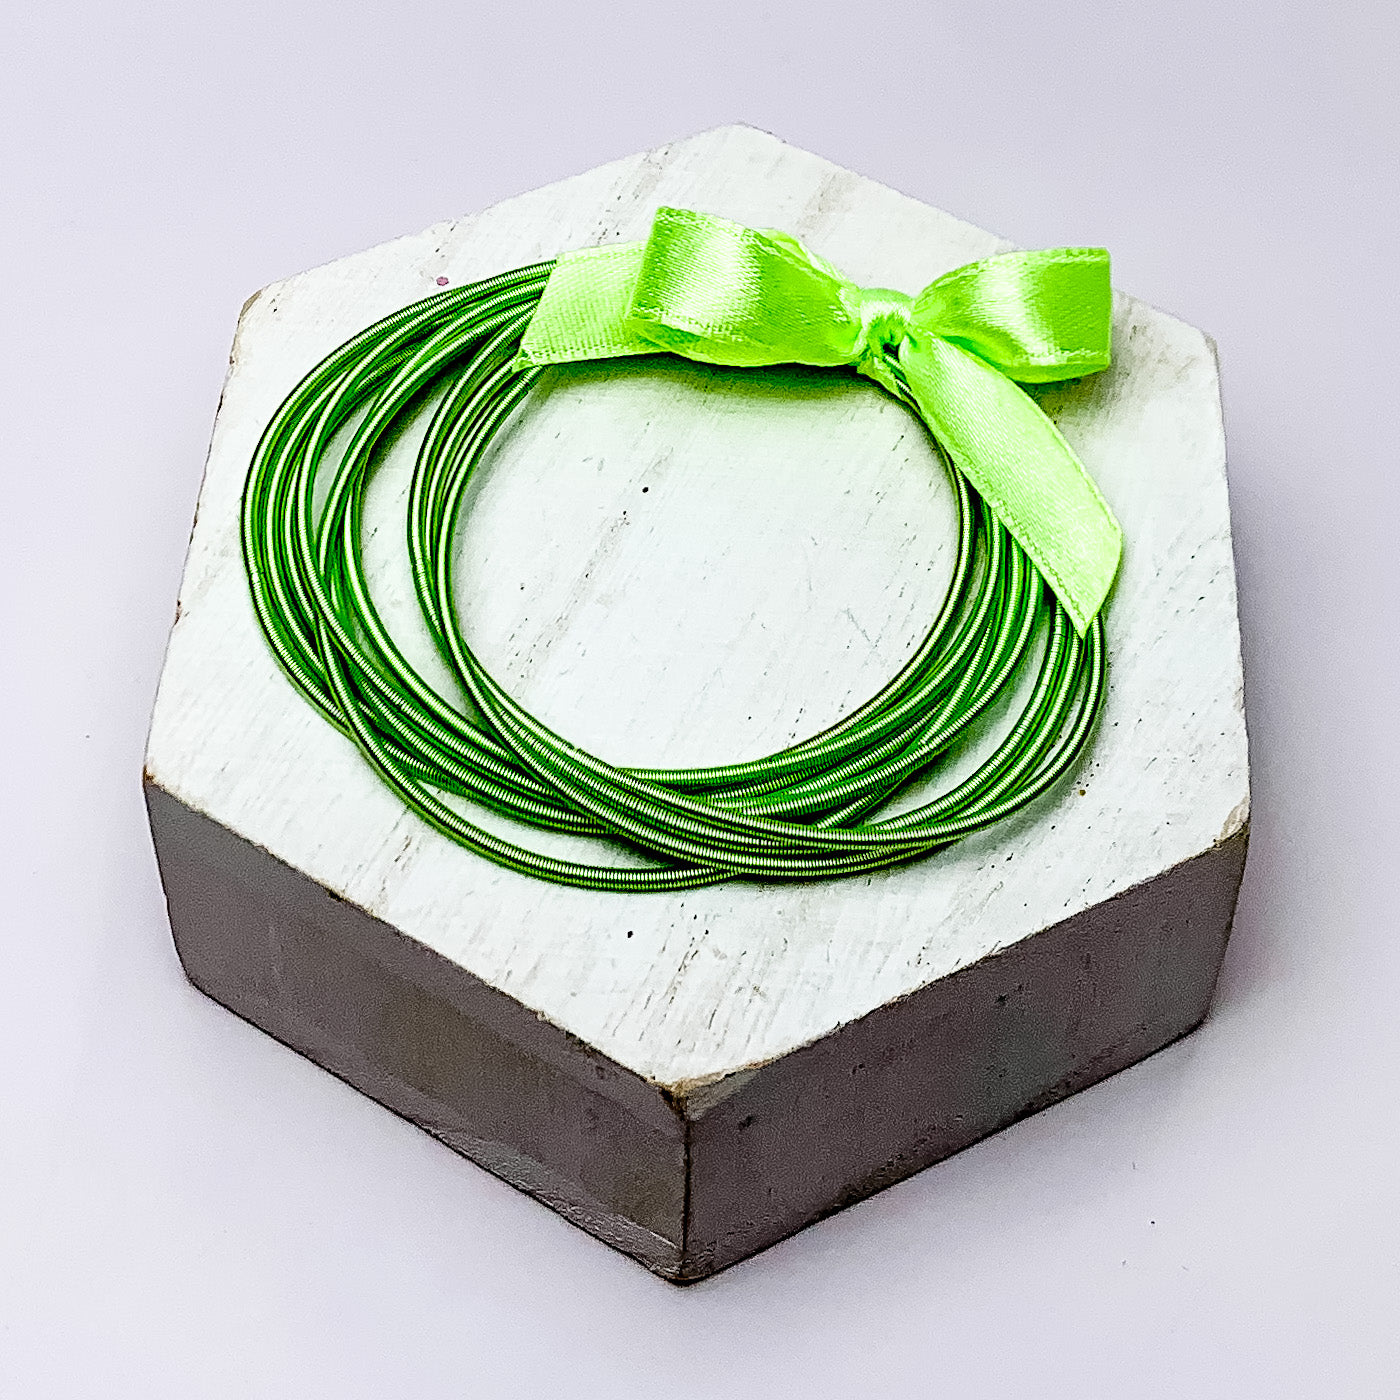 Guitar String Bracelets with Bow in Light Green. Pictured o n a white background sitting on top of a white block.